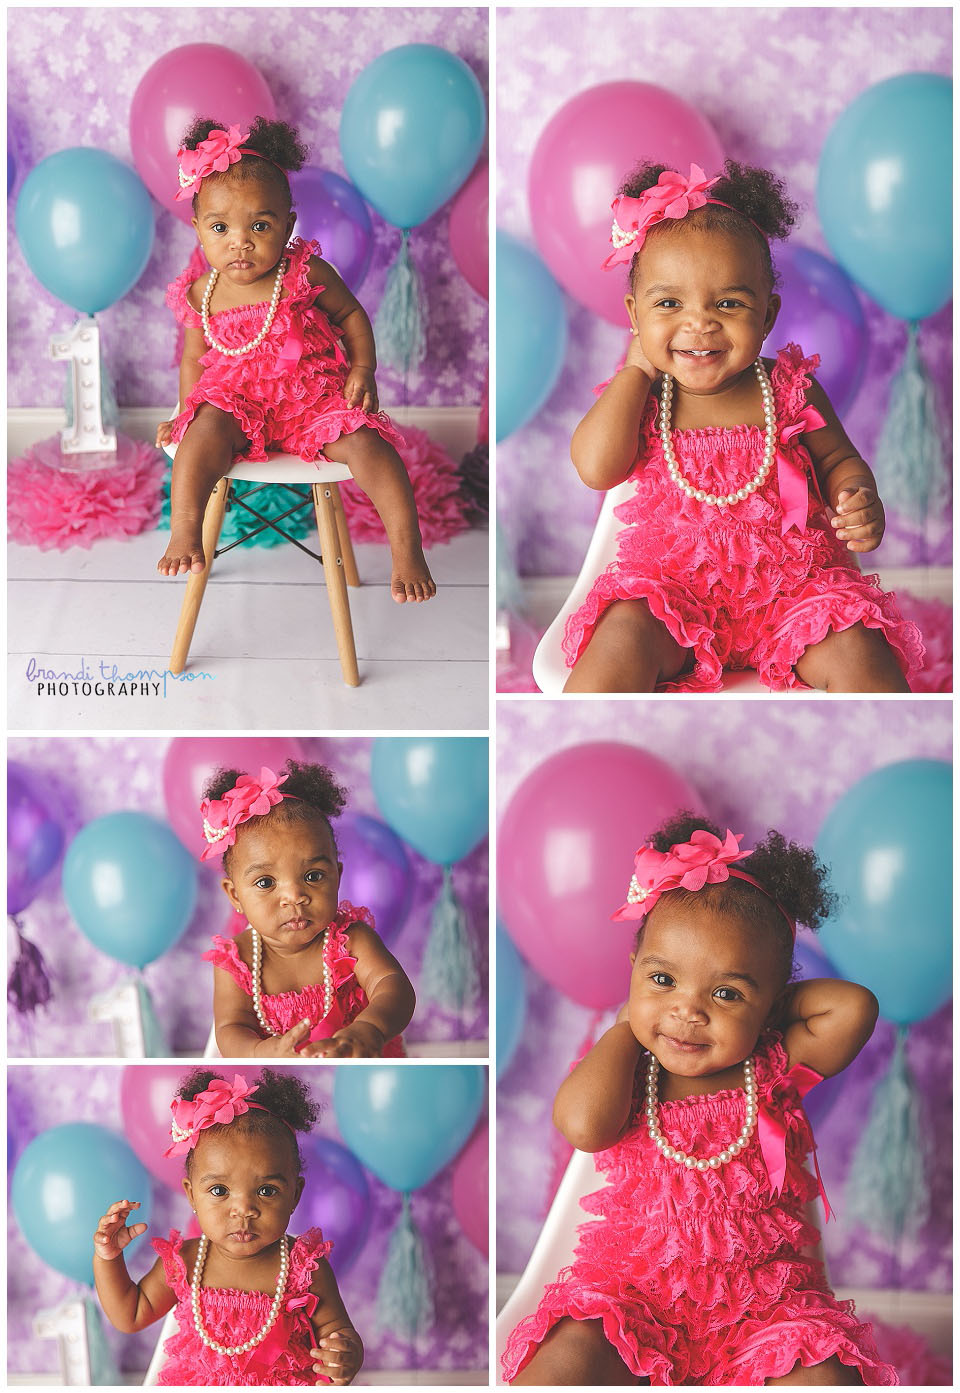 bright pink cake smash photography session in studio with one year old girl